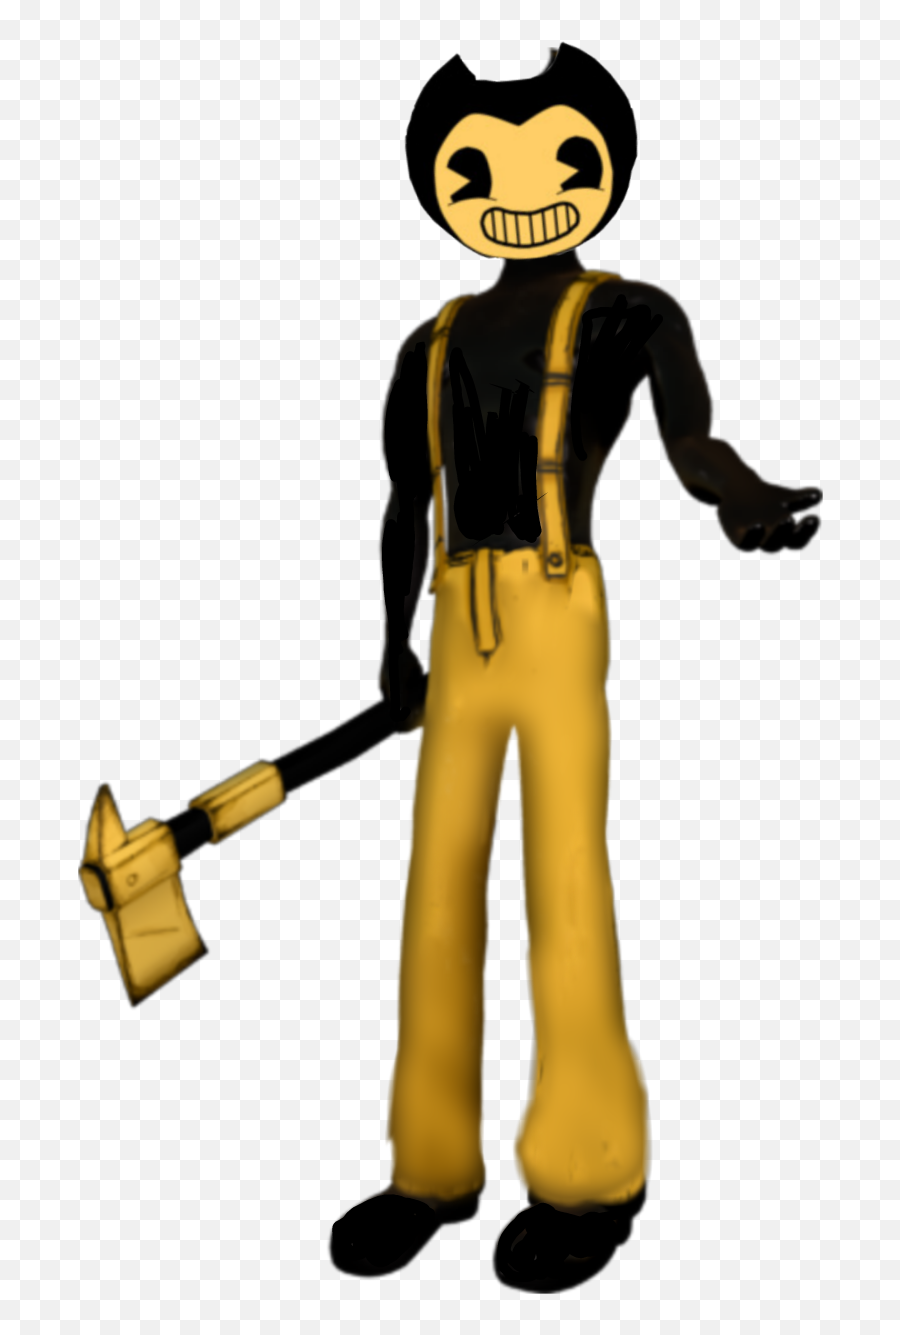 The Most Edited Sammylawrence Picsart - Bendy Characters Emoji,Luciel Emoticon